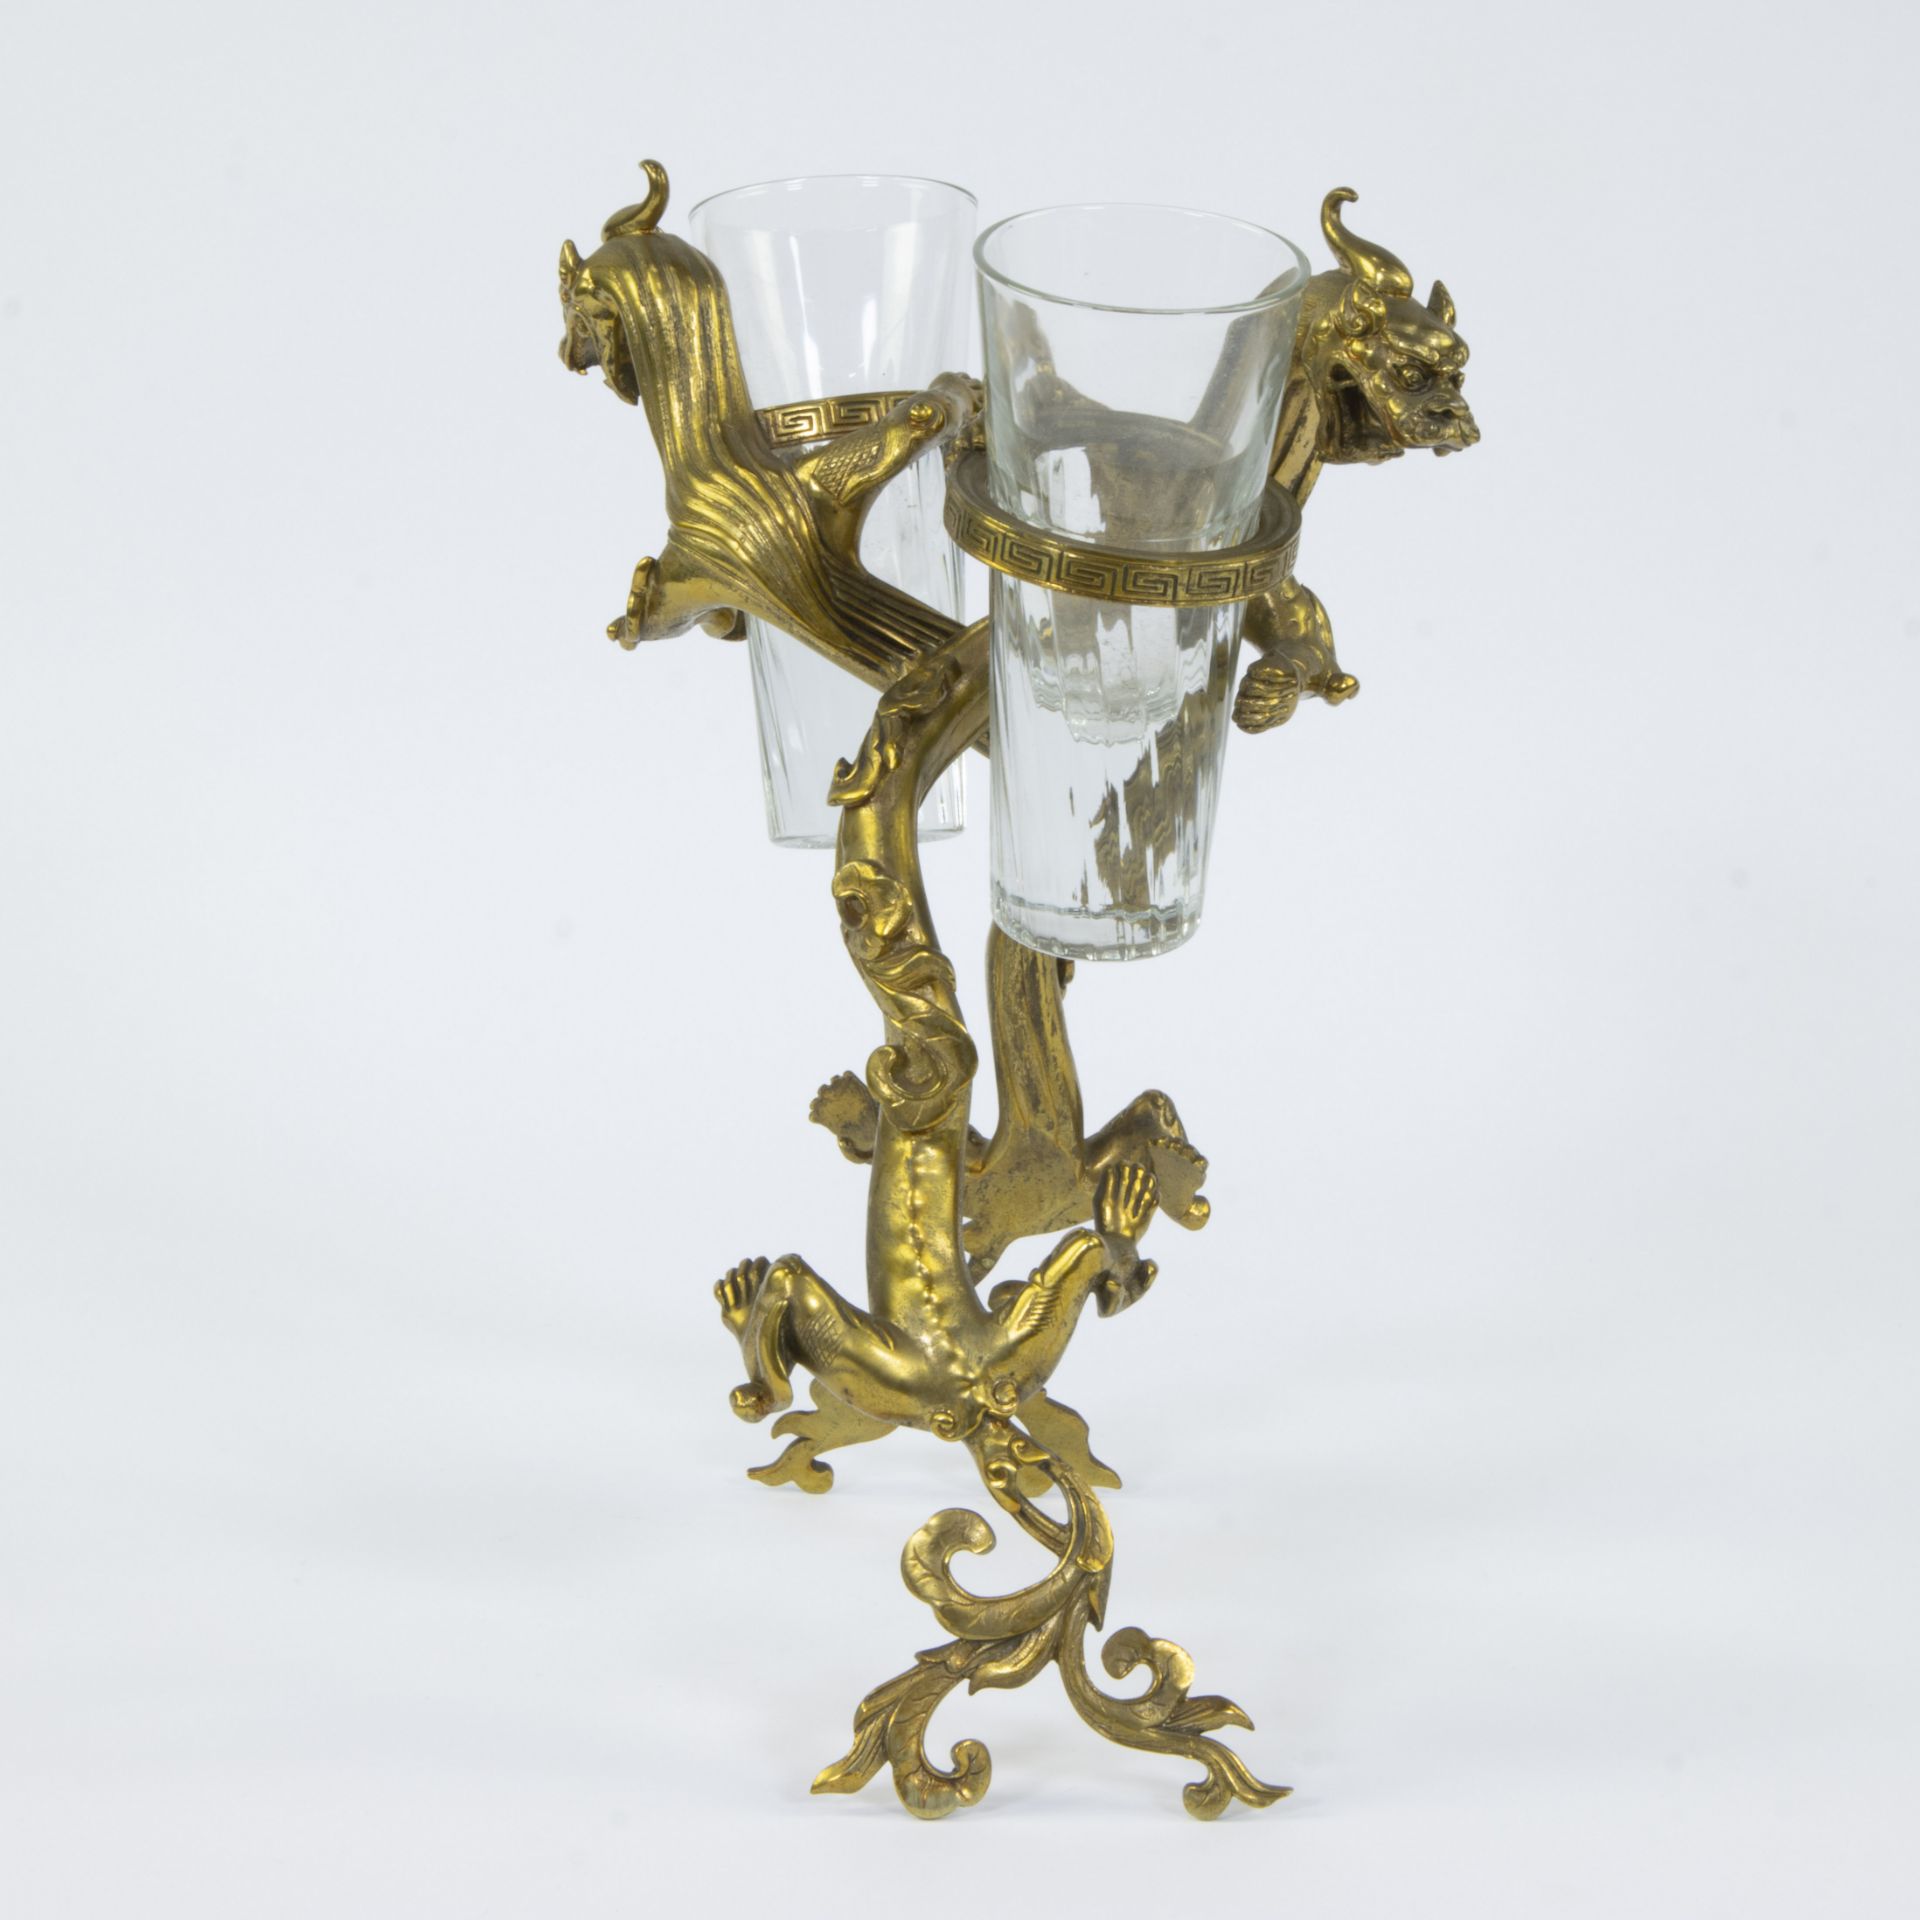 A 'twin' glass holder in gilt bronze in the shape of 2 dragons, circa 1900 - Image 4 of 4